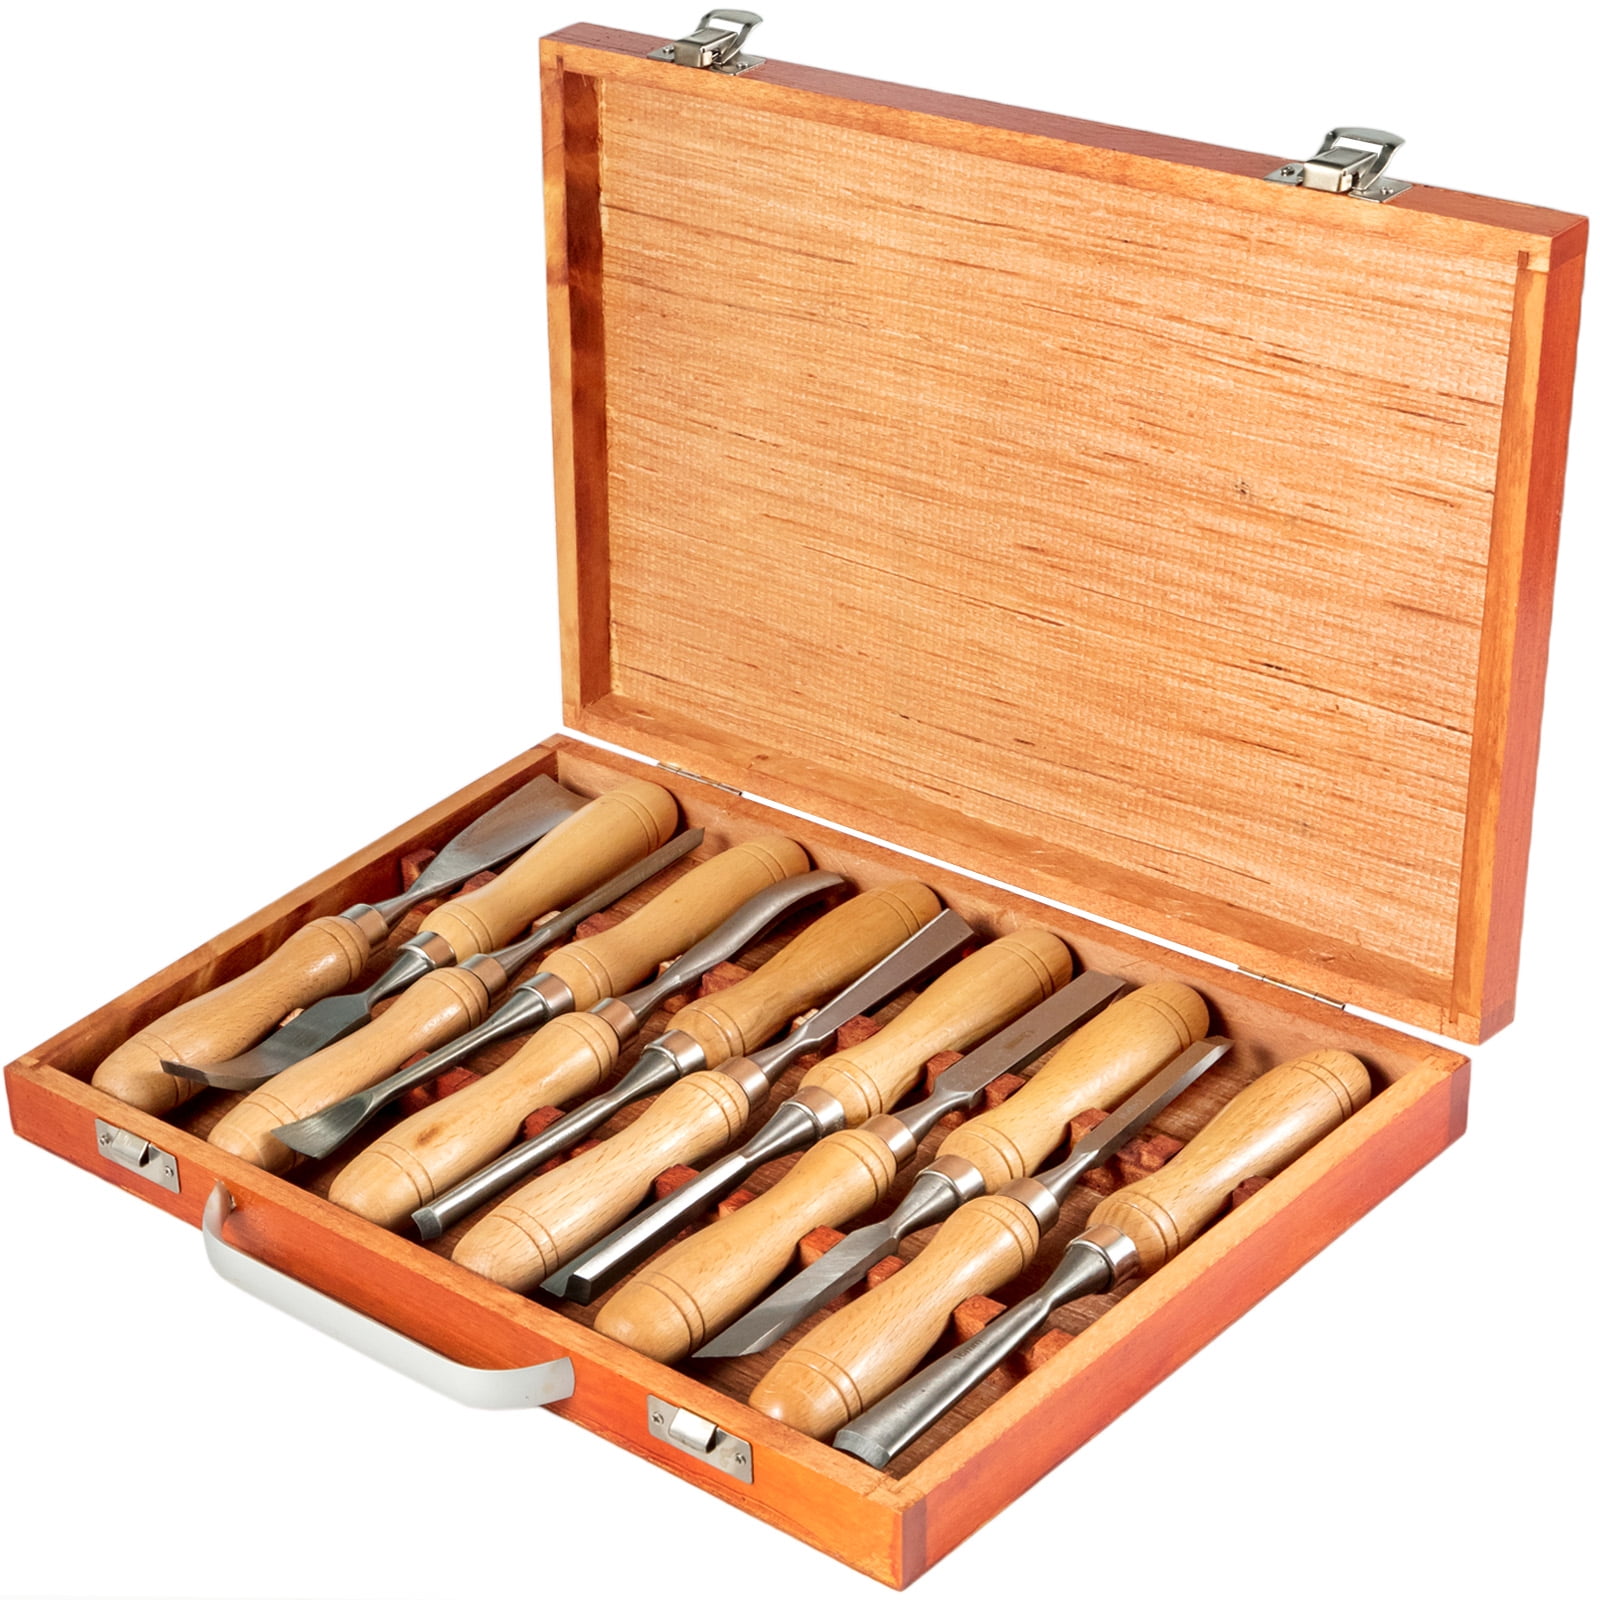 Wood Carving Tools Set of 12 Chisels with Canvas Case